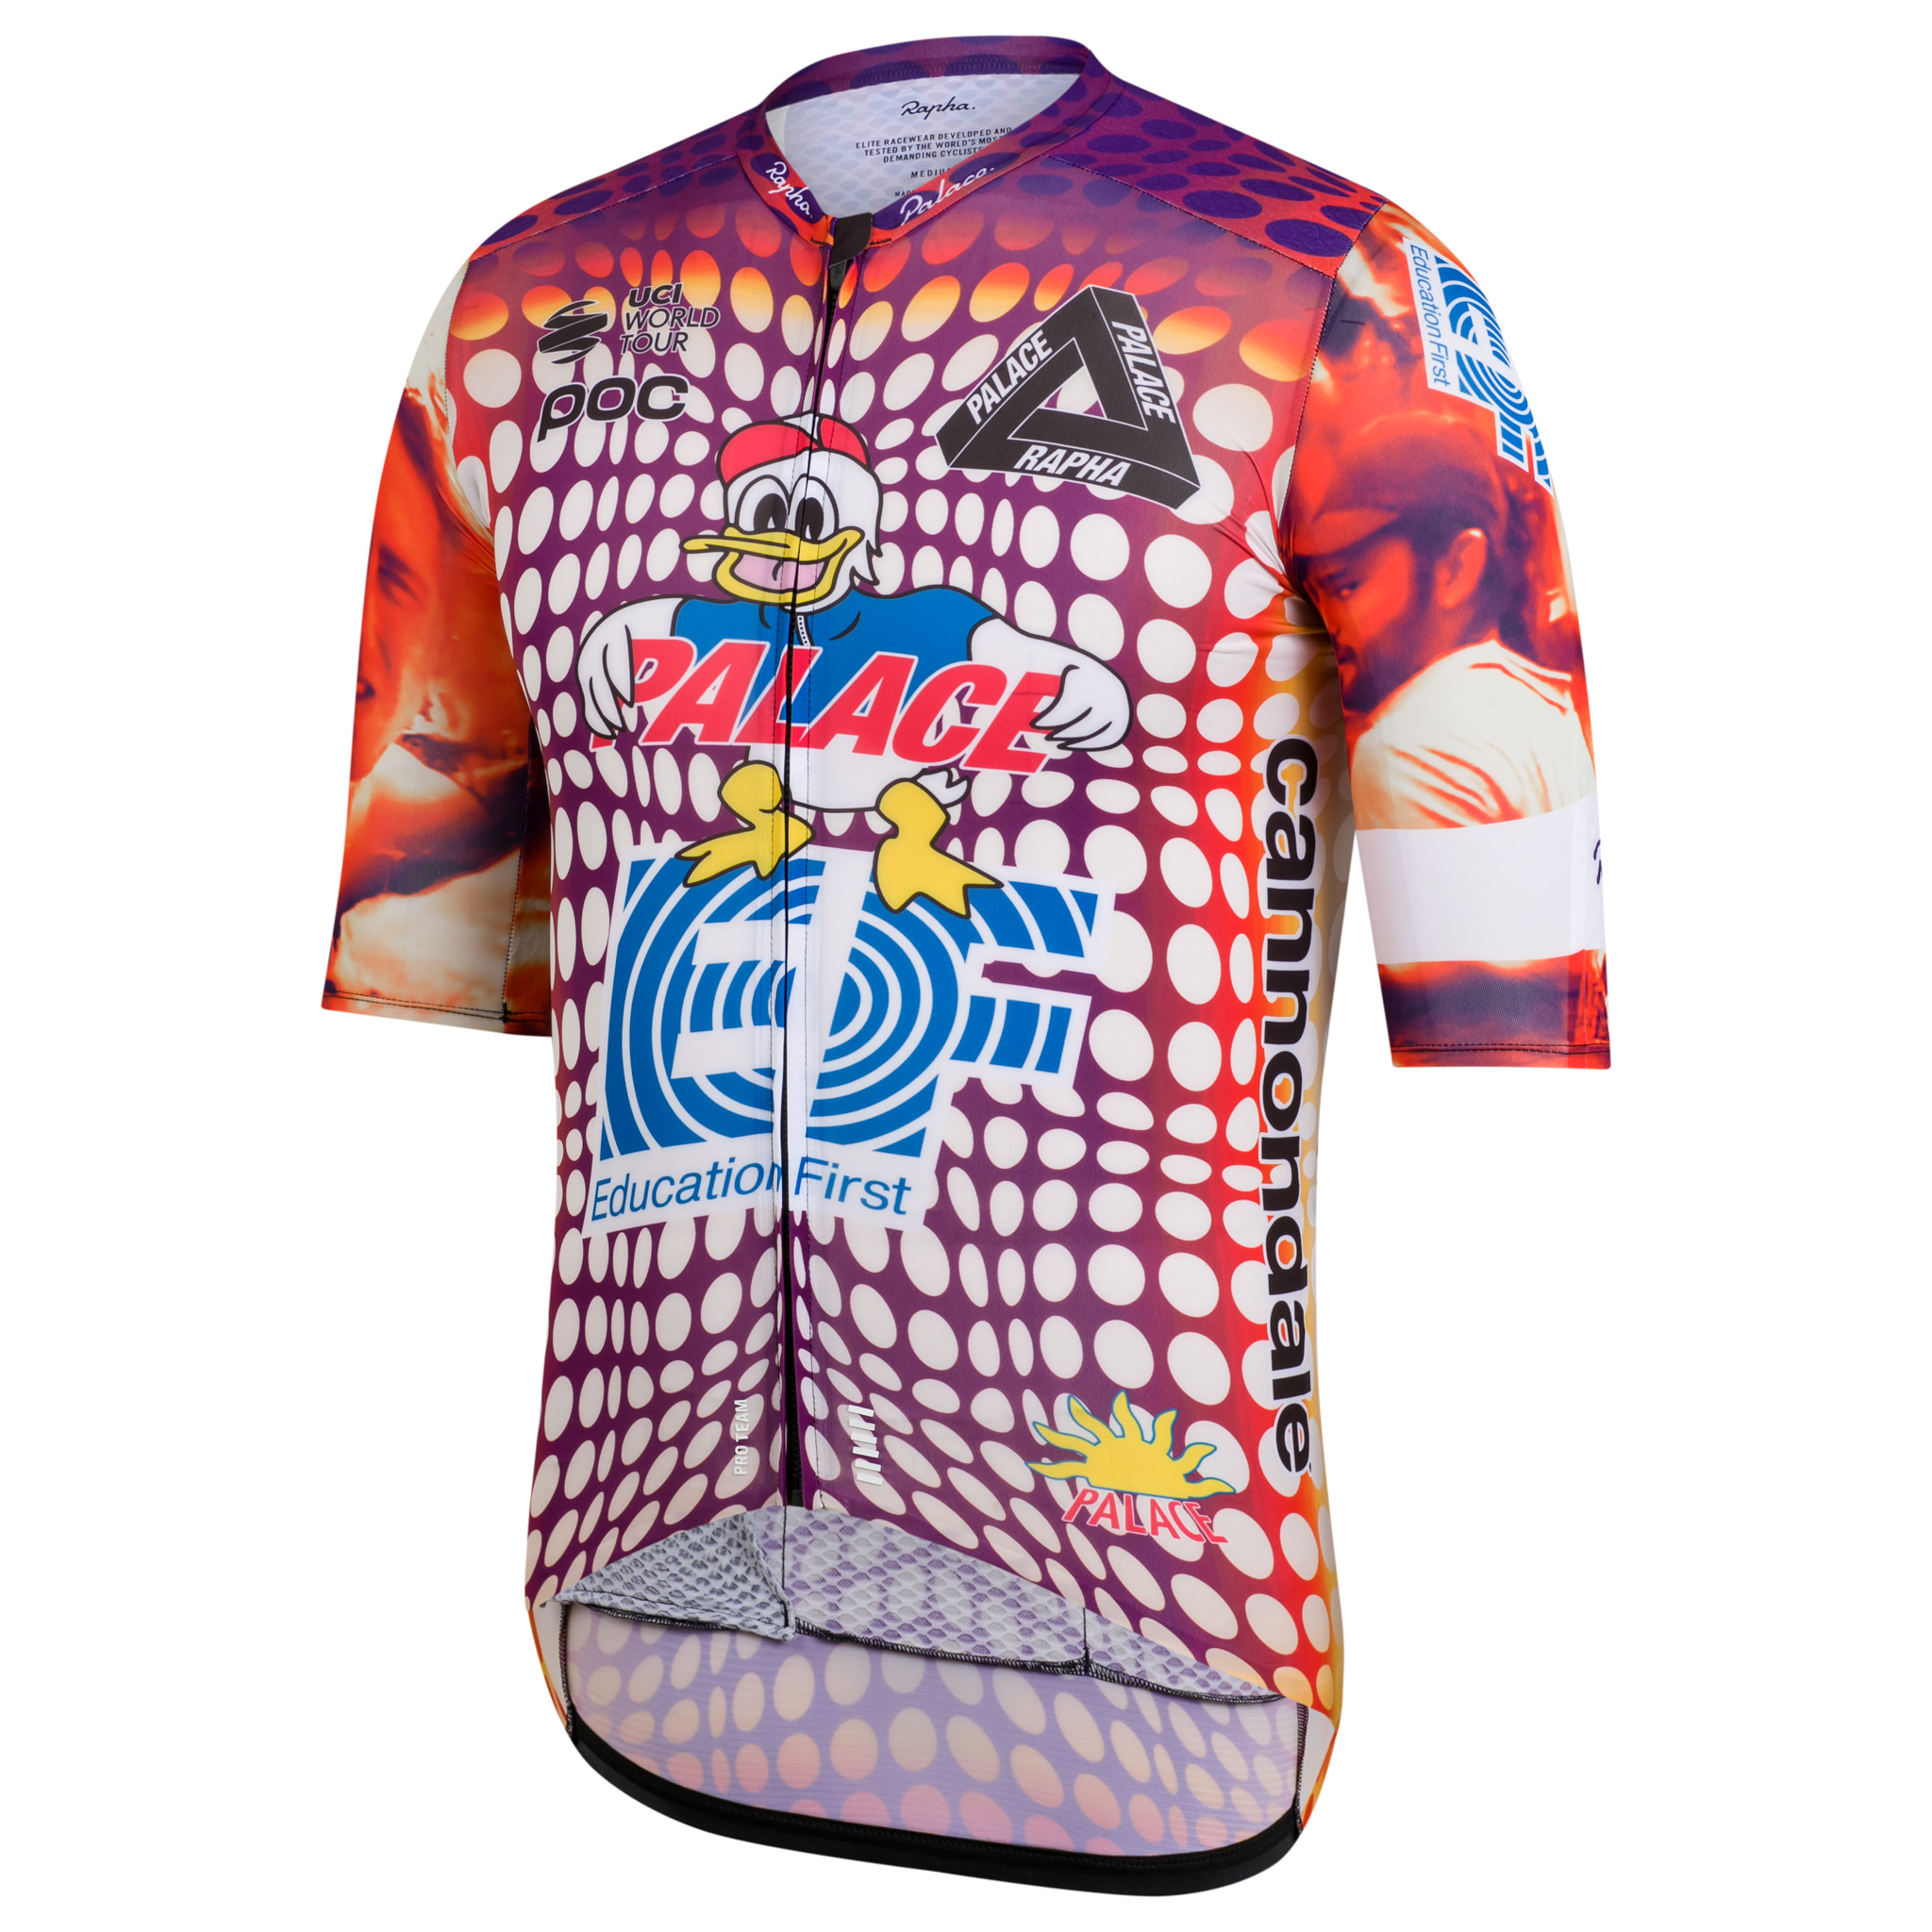 rapha education first jersey